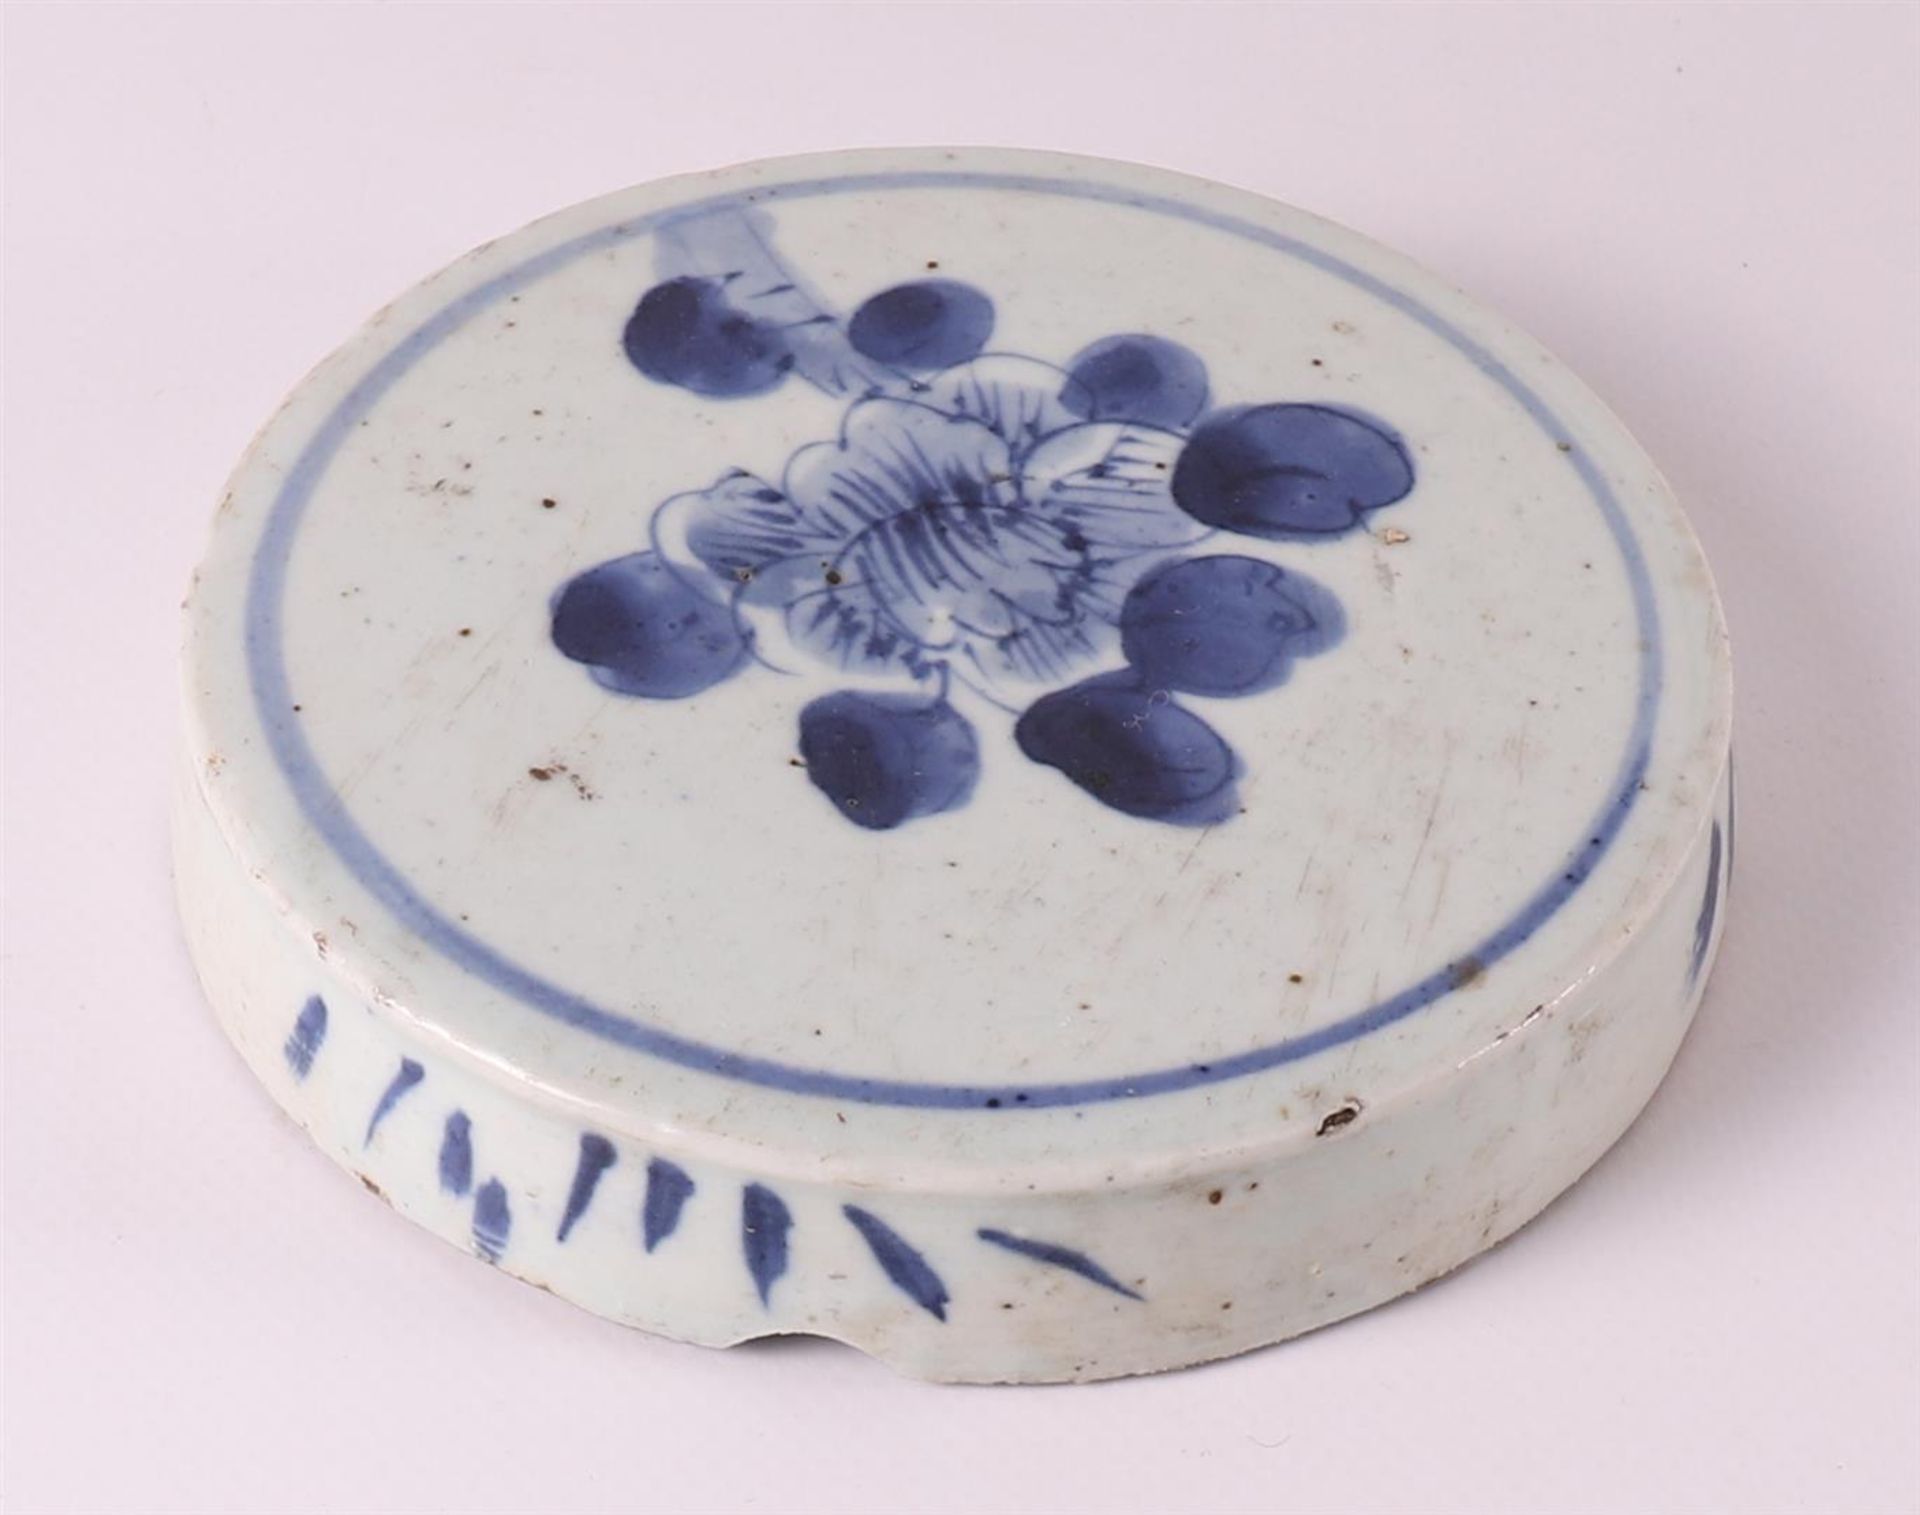 A blue/white porcelain ginger jar with lid, China, 19th century. - Image 10 of 11